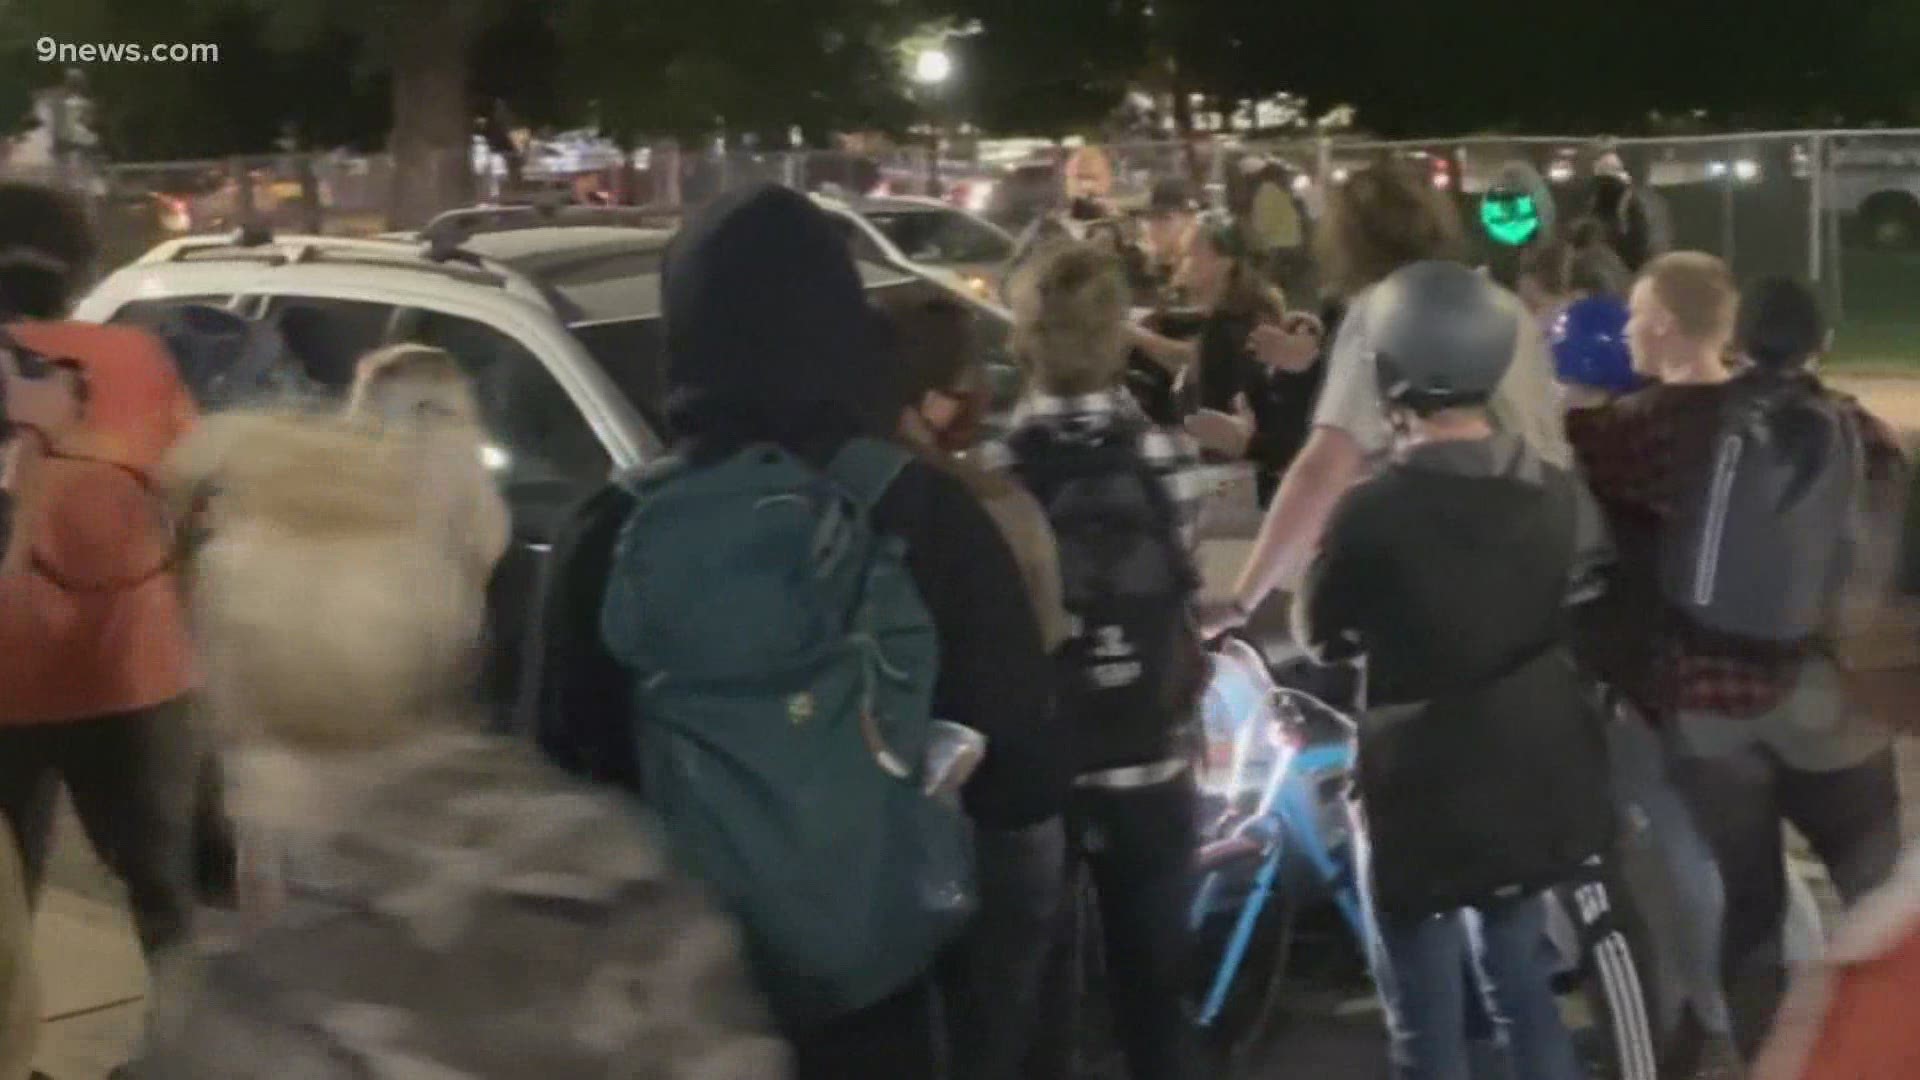 A driver who was seen driving through the protests has not been cited or arrested.